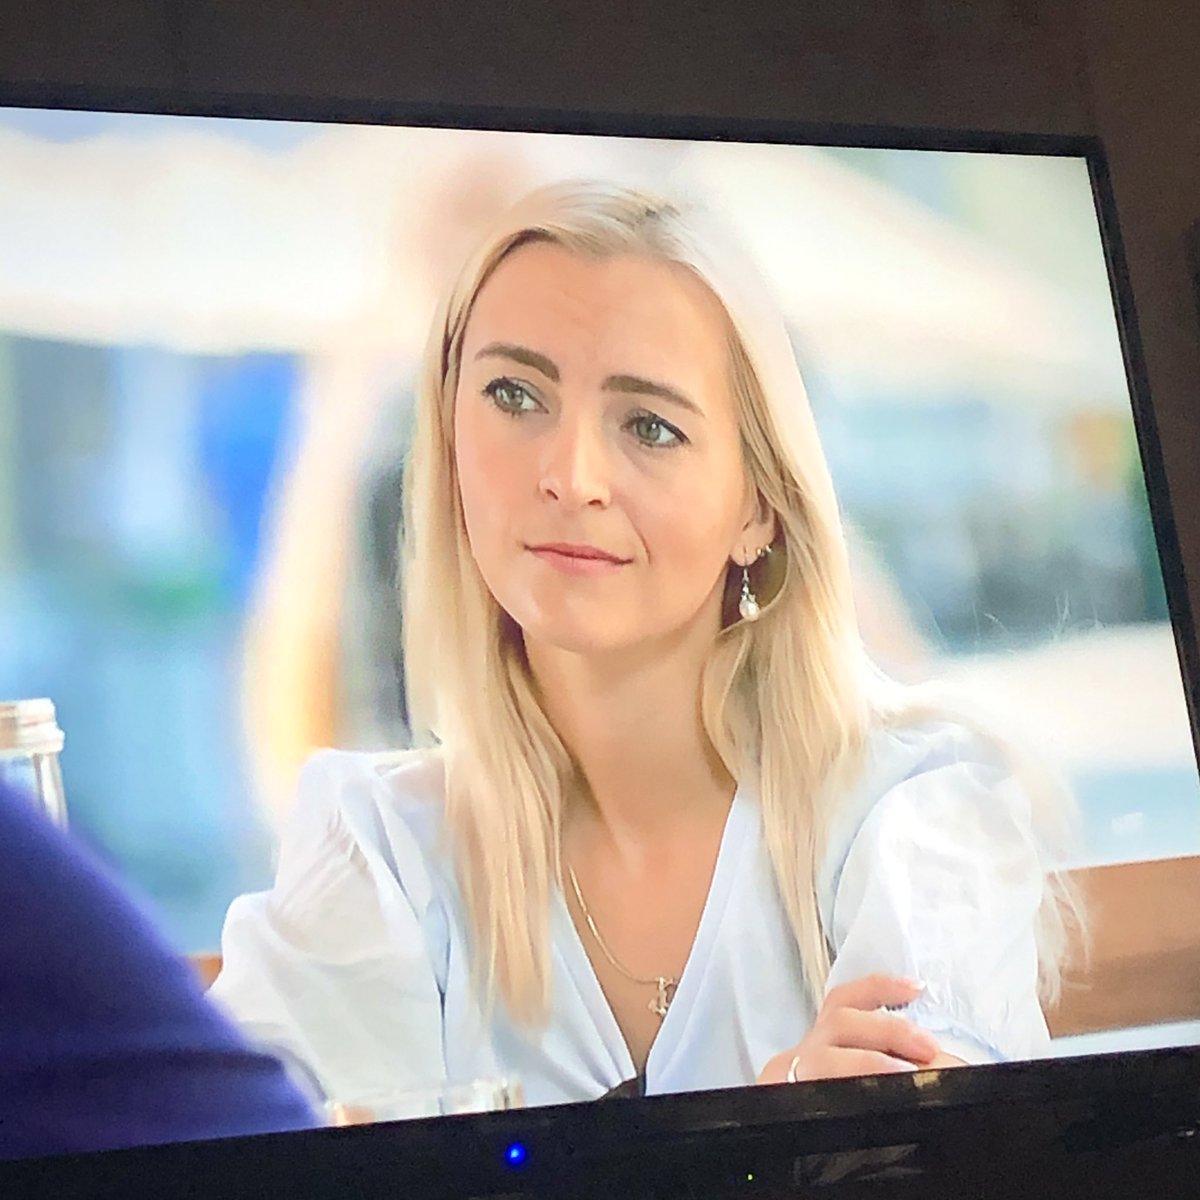 yes i'm still watching 90 day fiancé and she's very pretty too 